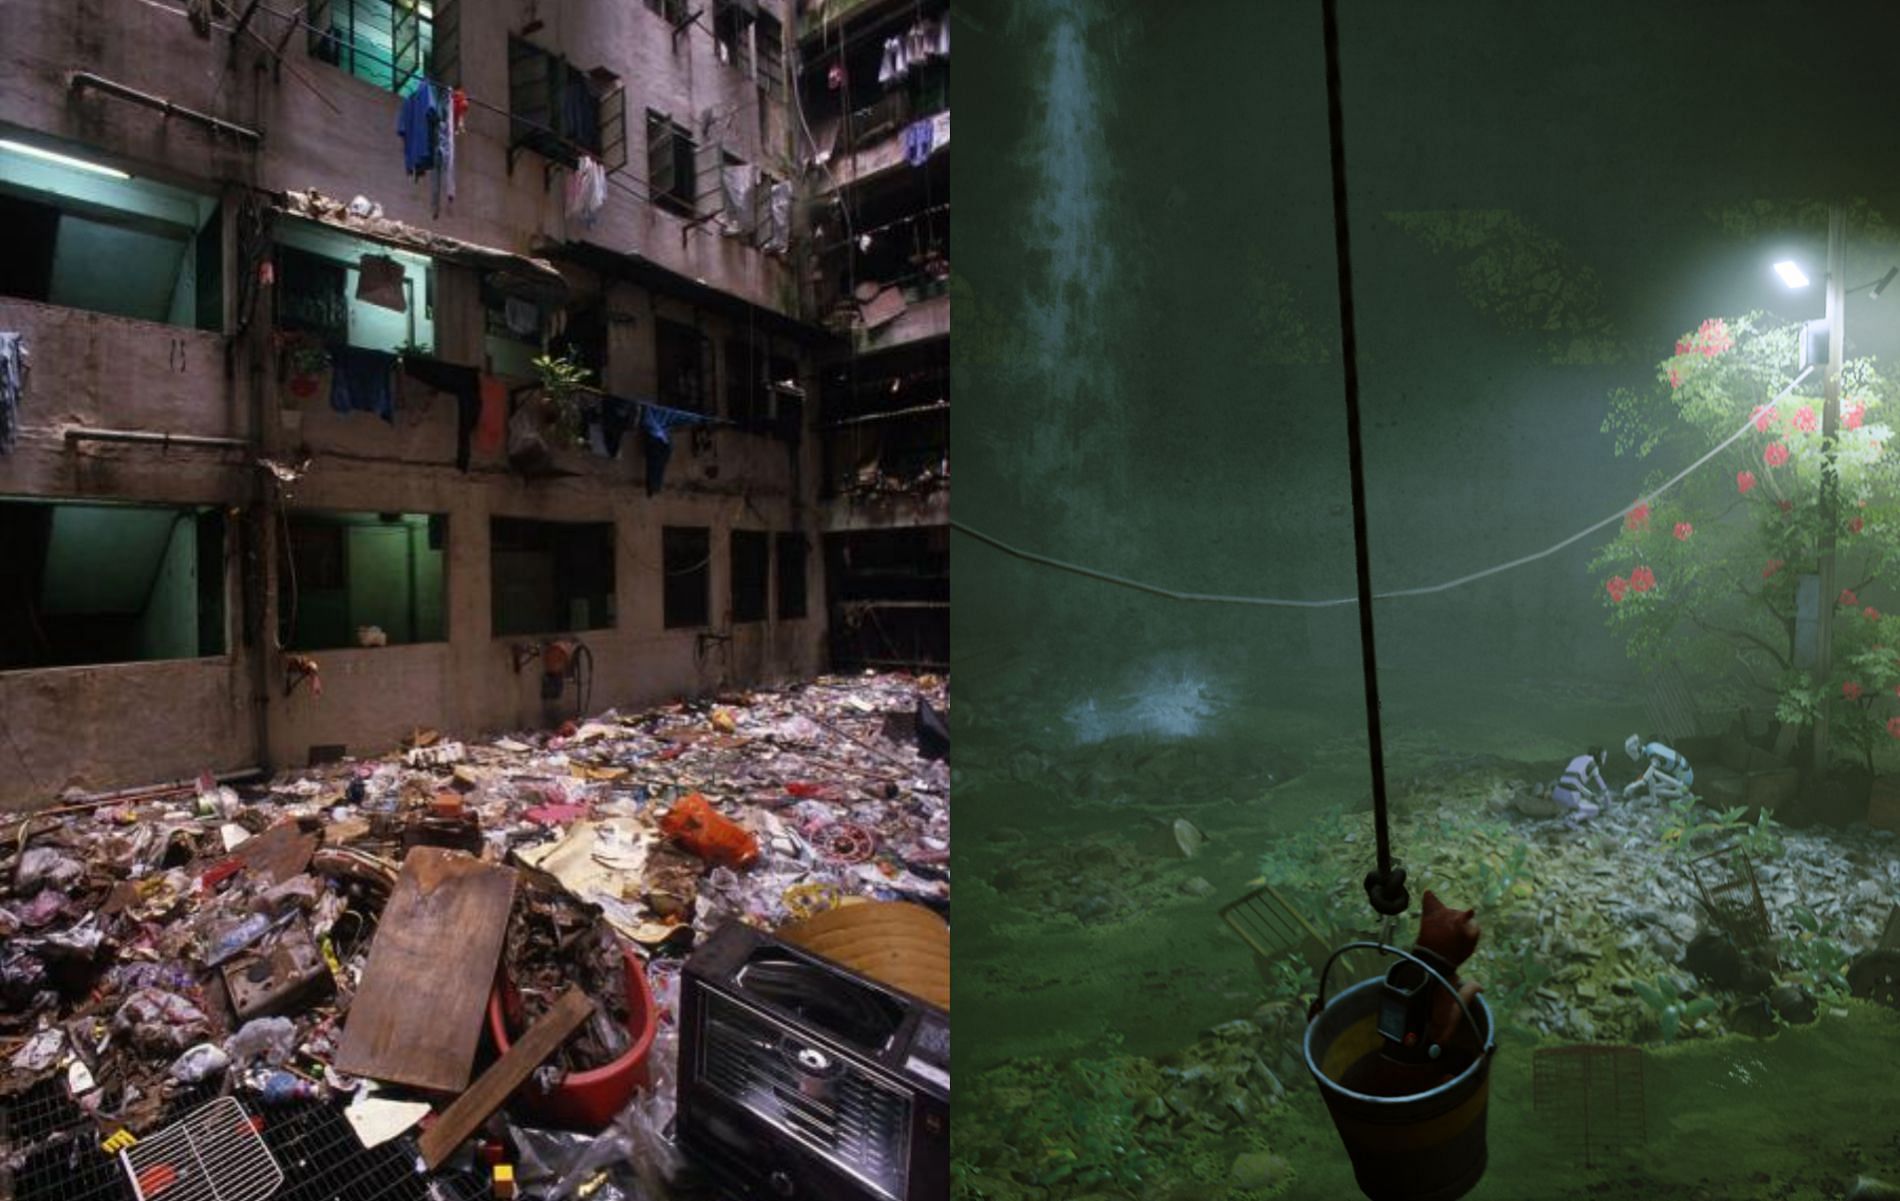 Refuse and waste (Image on left via Greg Girard, Image on right via Stray)